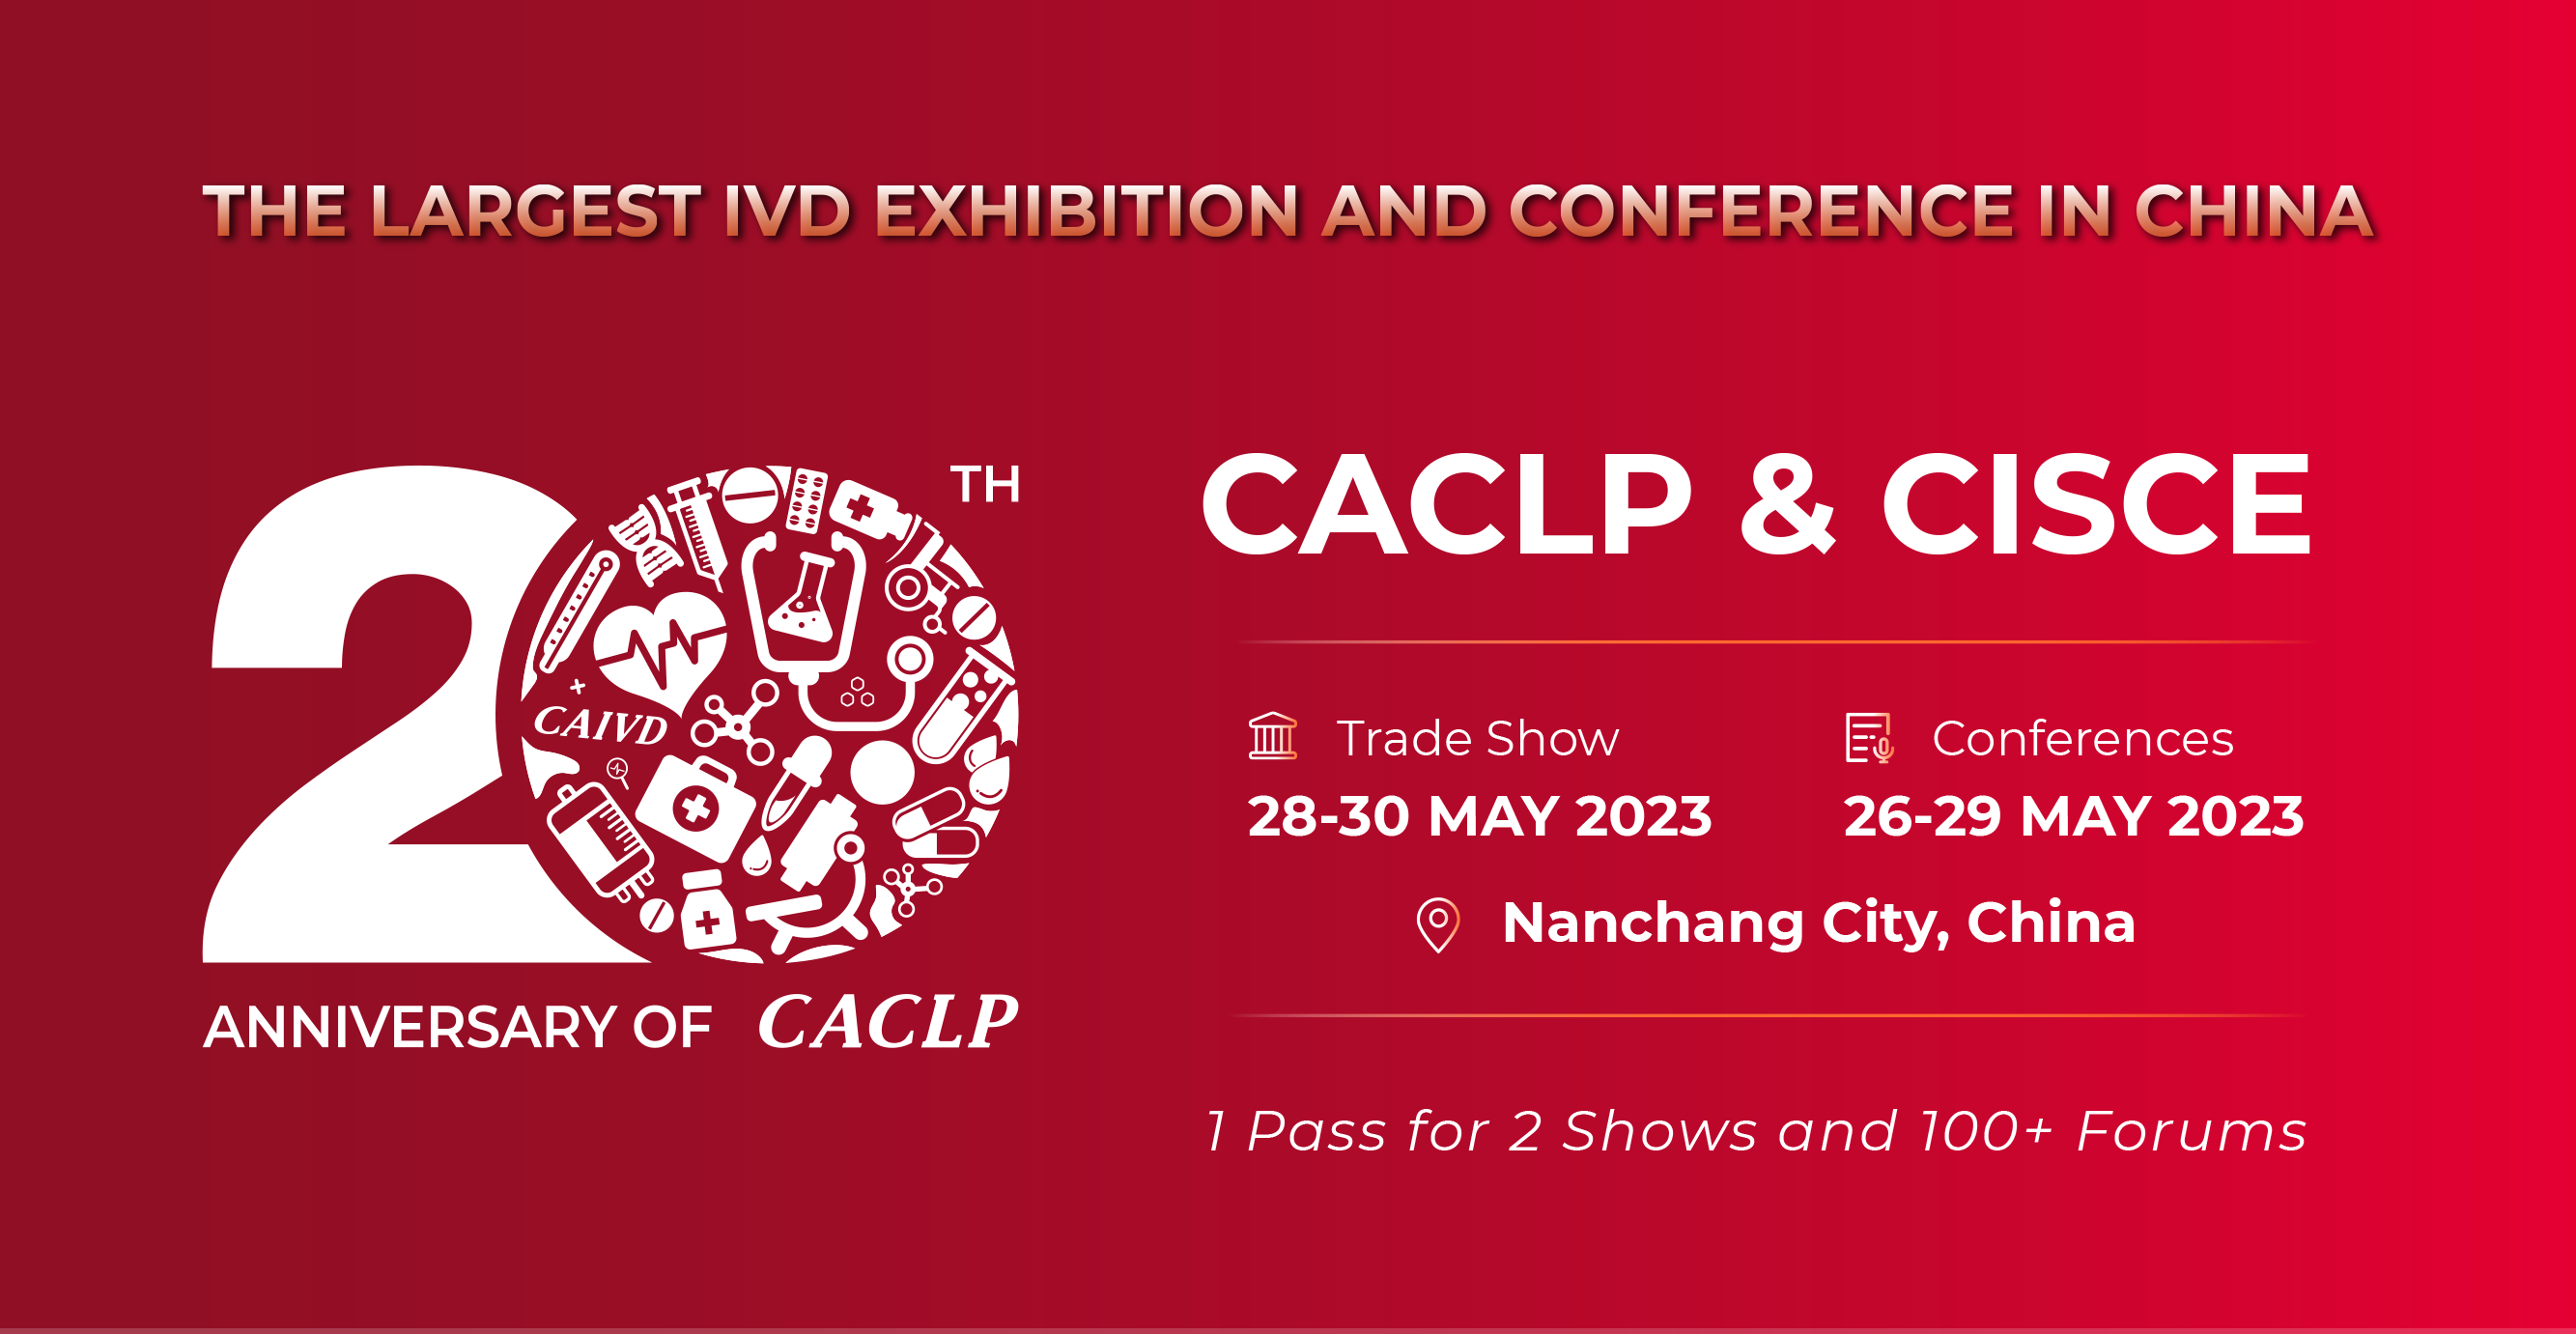 Register Now for Free Entry: Get Ready to Explore the Latest IVD Technologies at CACLP & CISCE 2023